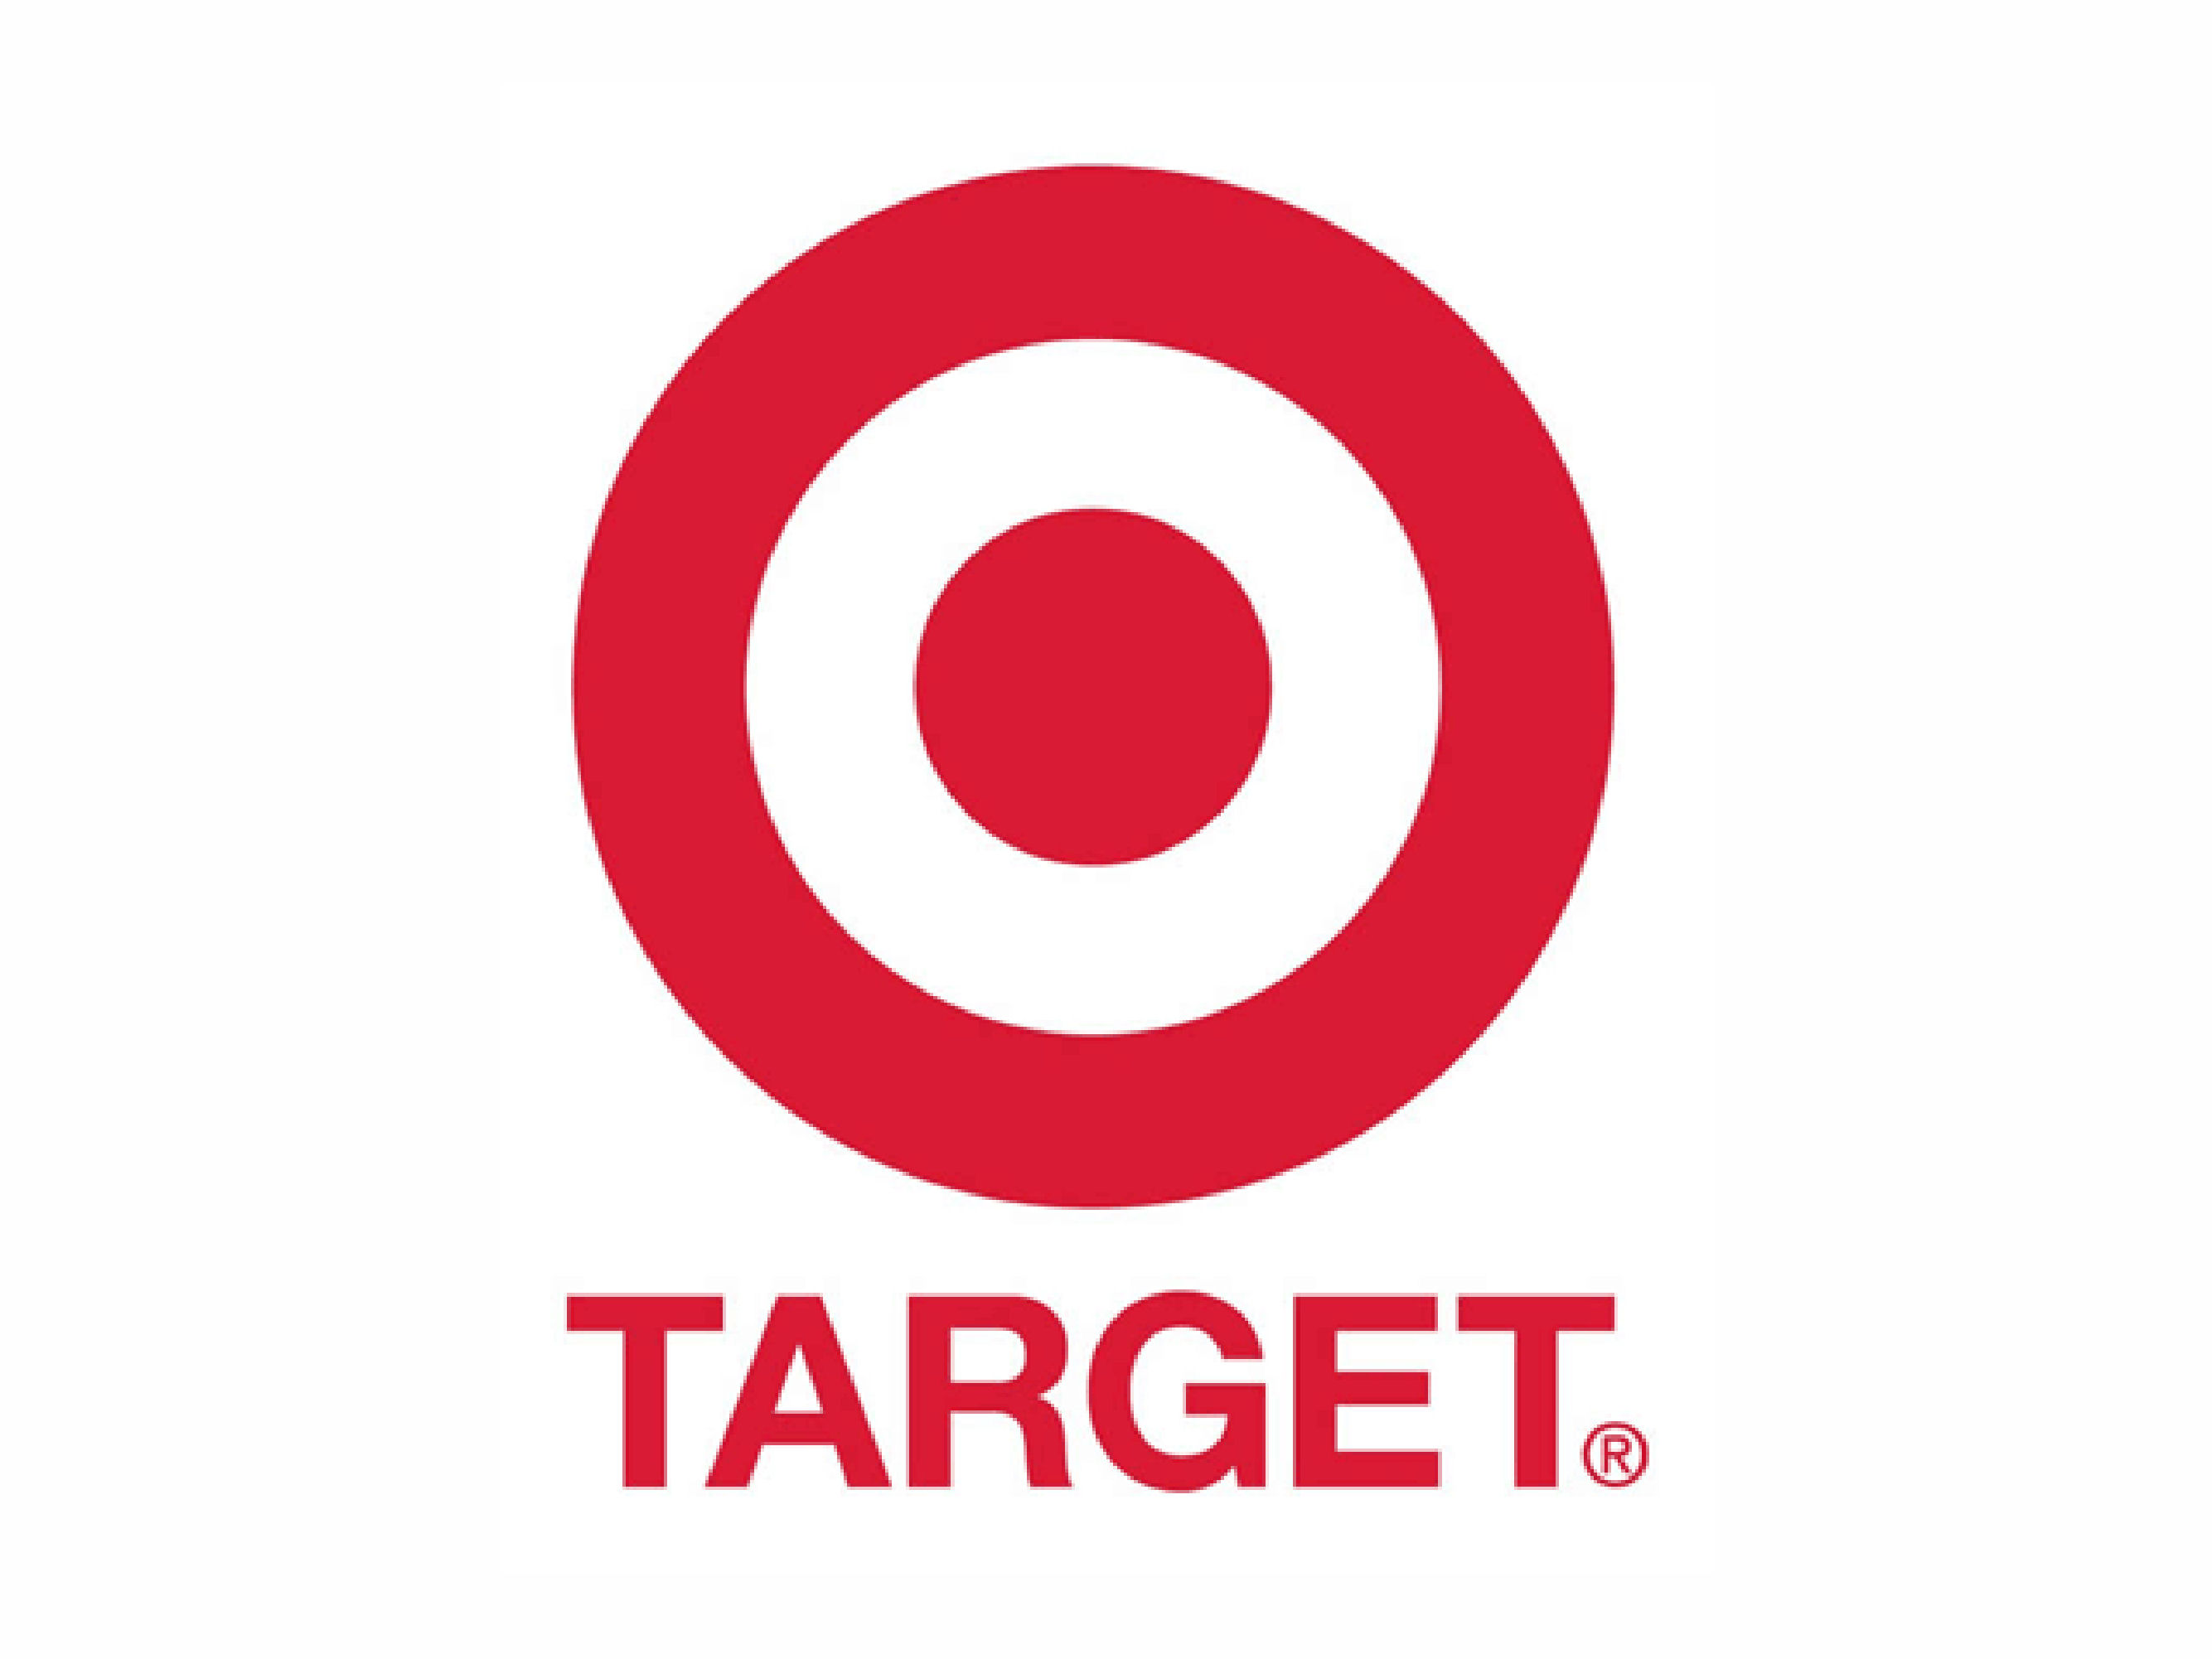 What Is the Official Target Logo - Ask.